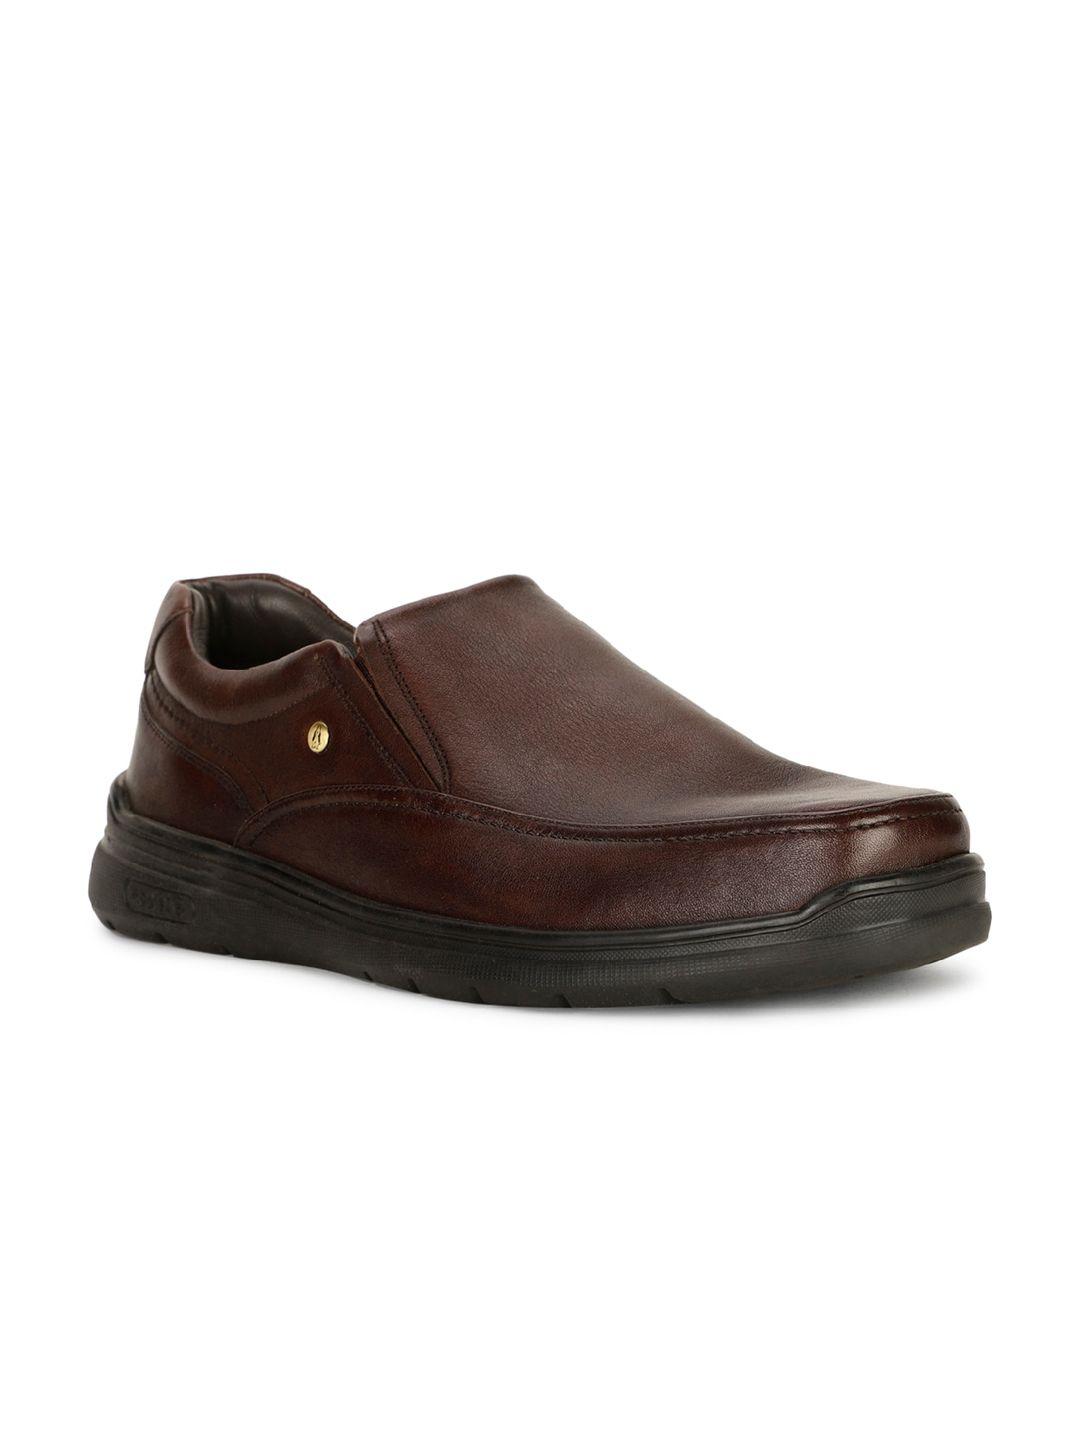 hush puppies men leather slip-on formal  shoes